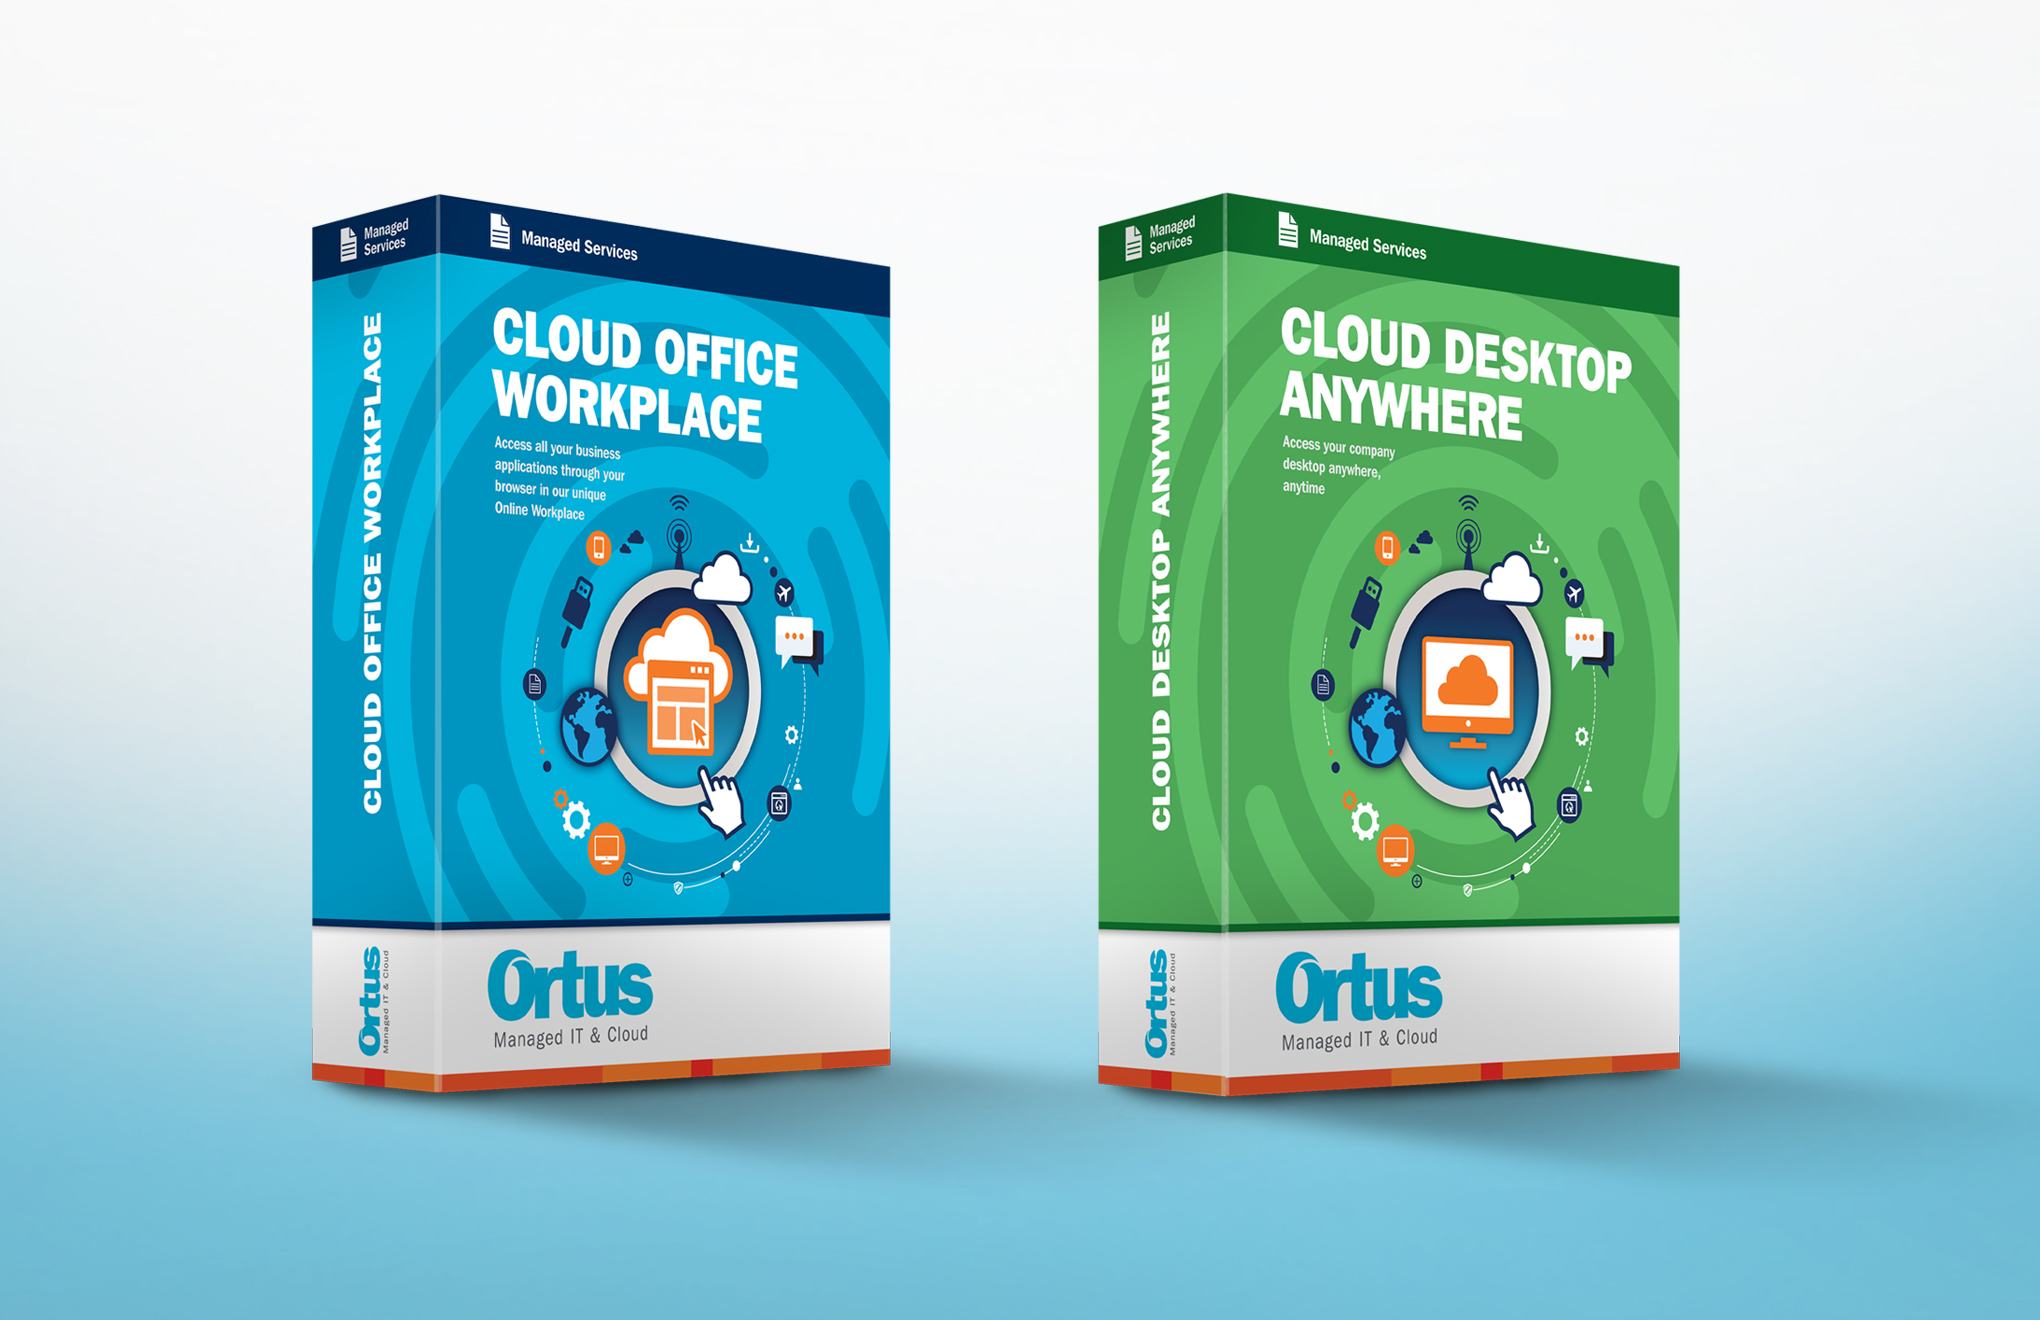 Ortus product boxes